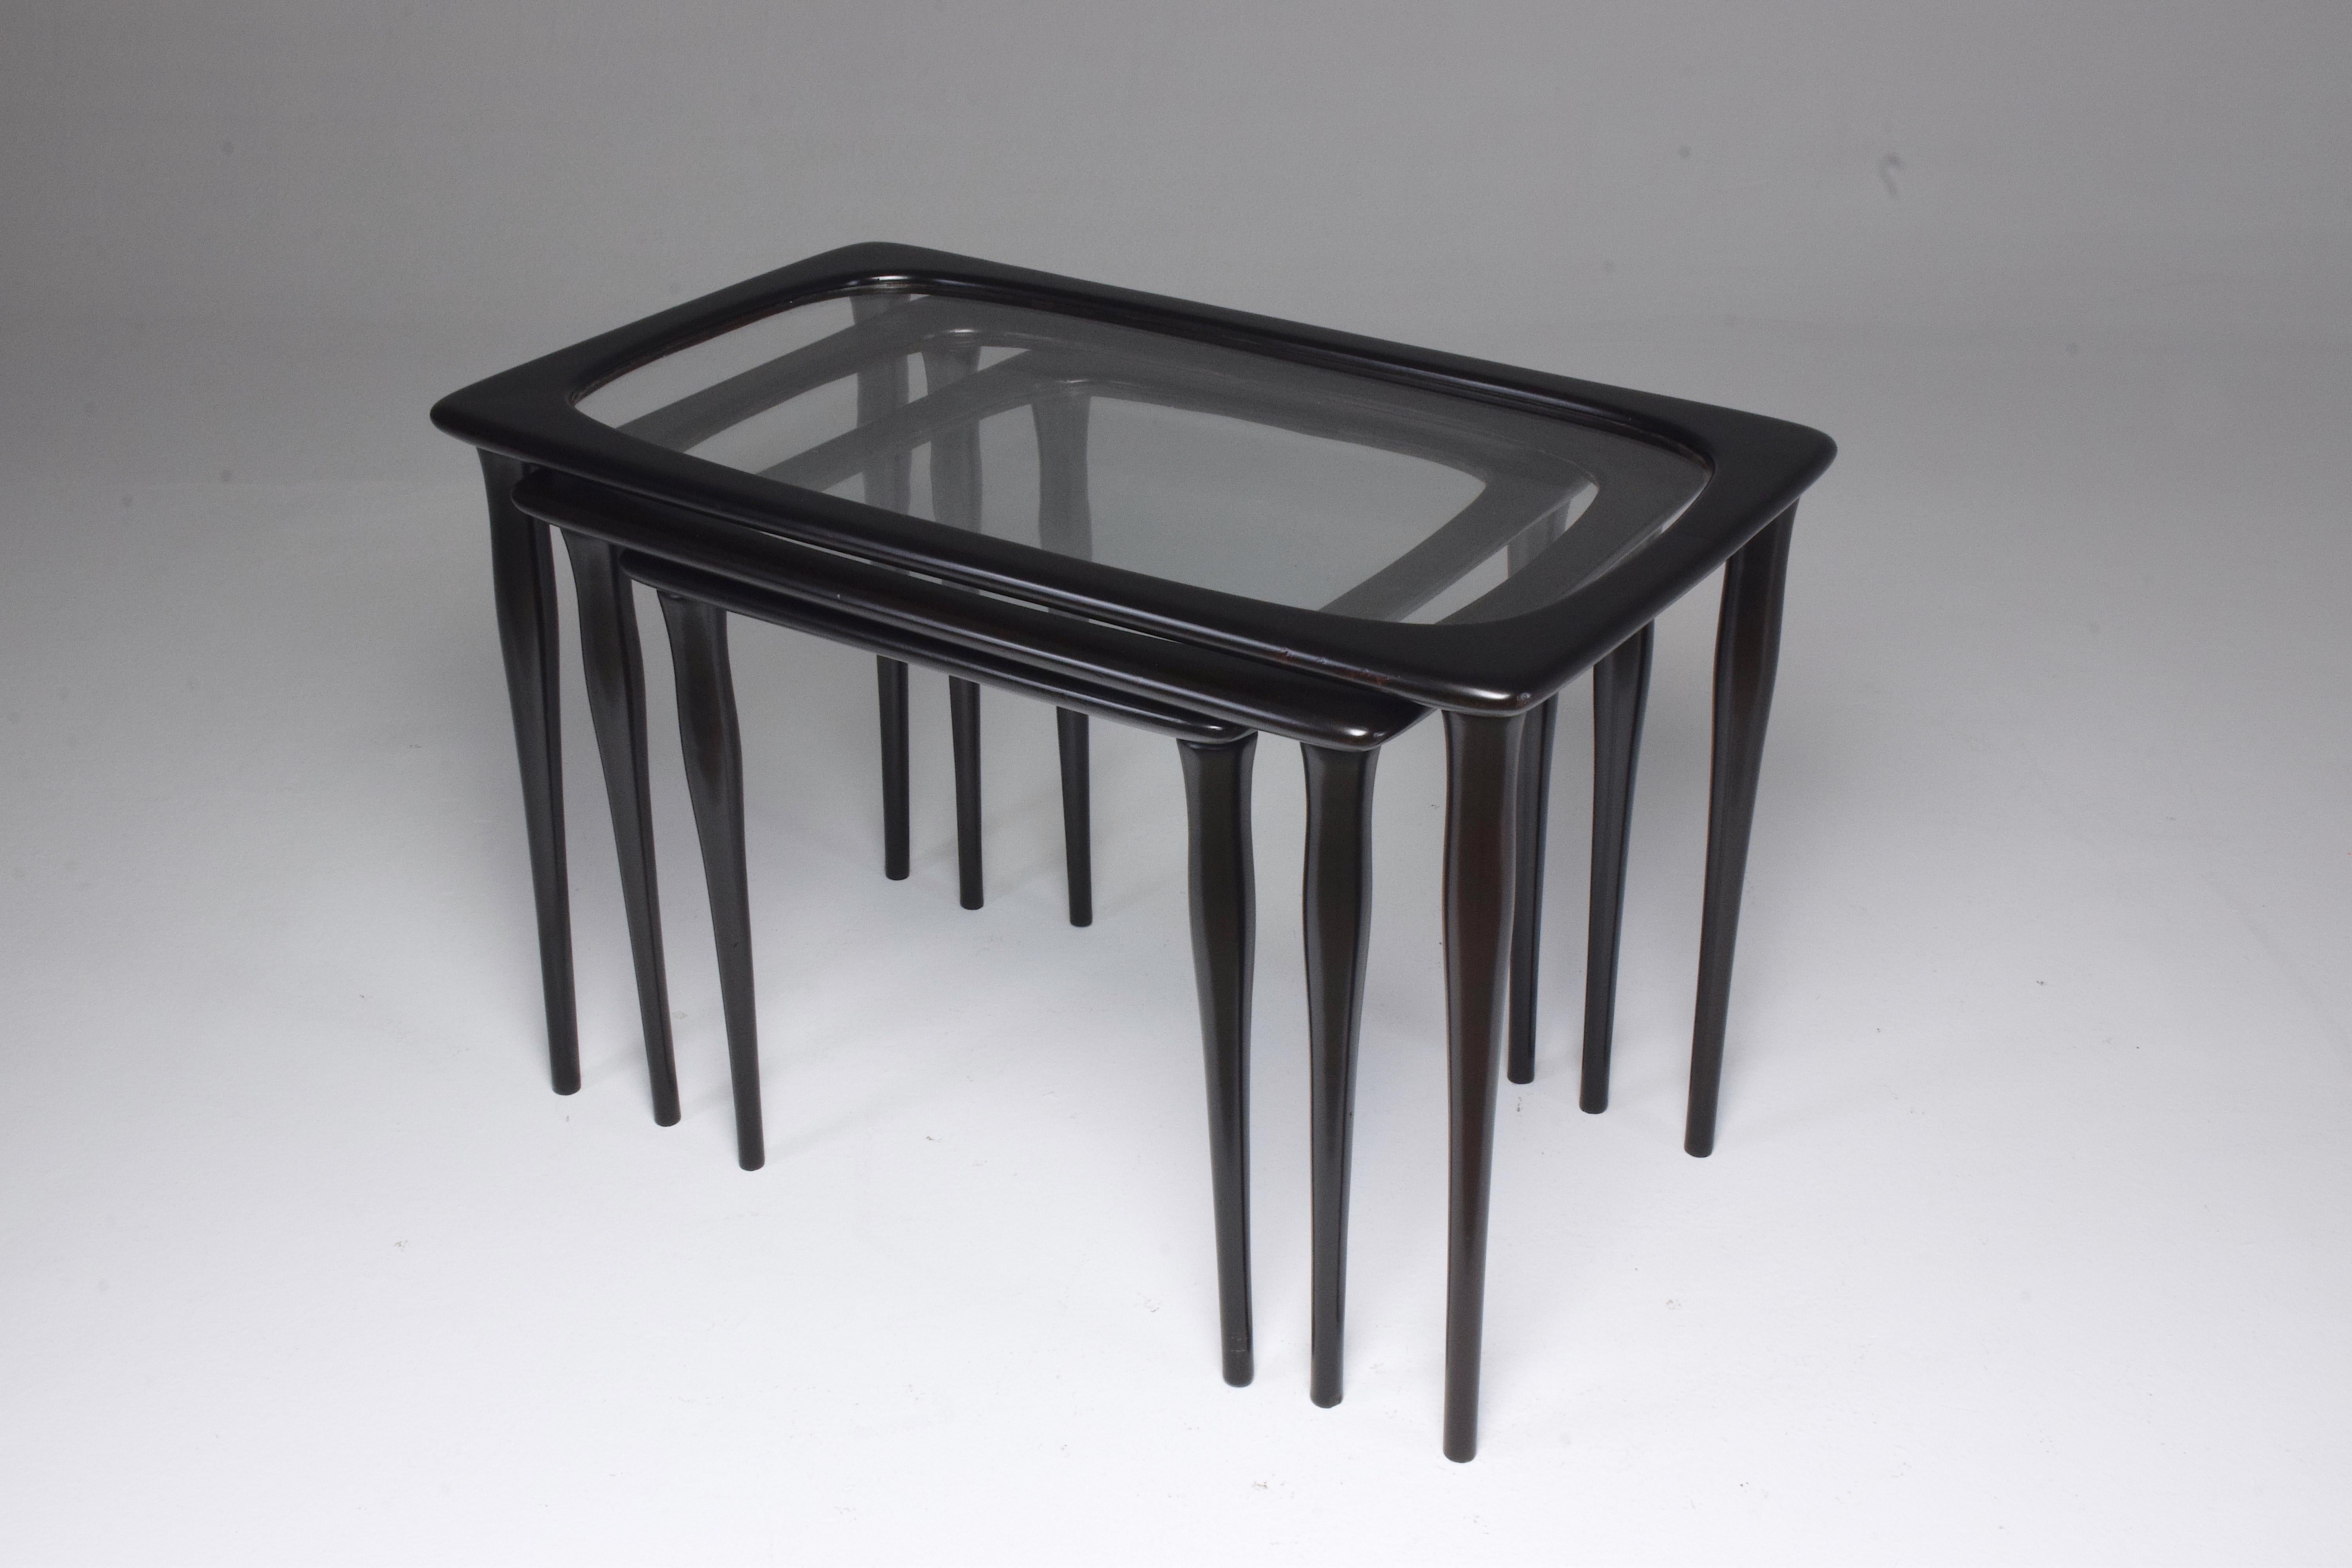 Three Italian Midcentury Nesting Tables by Ico Parisi, 1950s For Sale 1